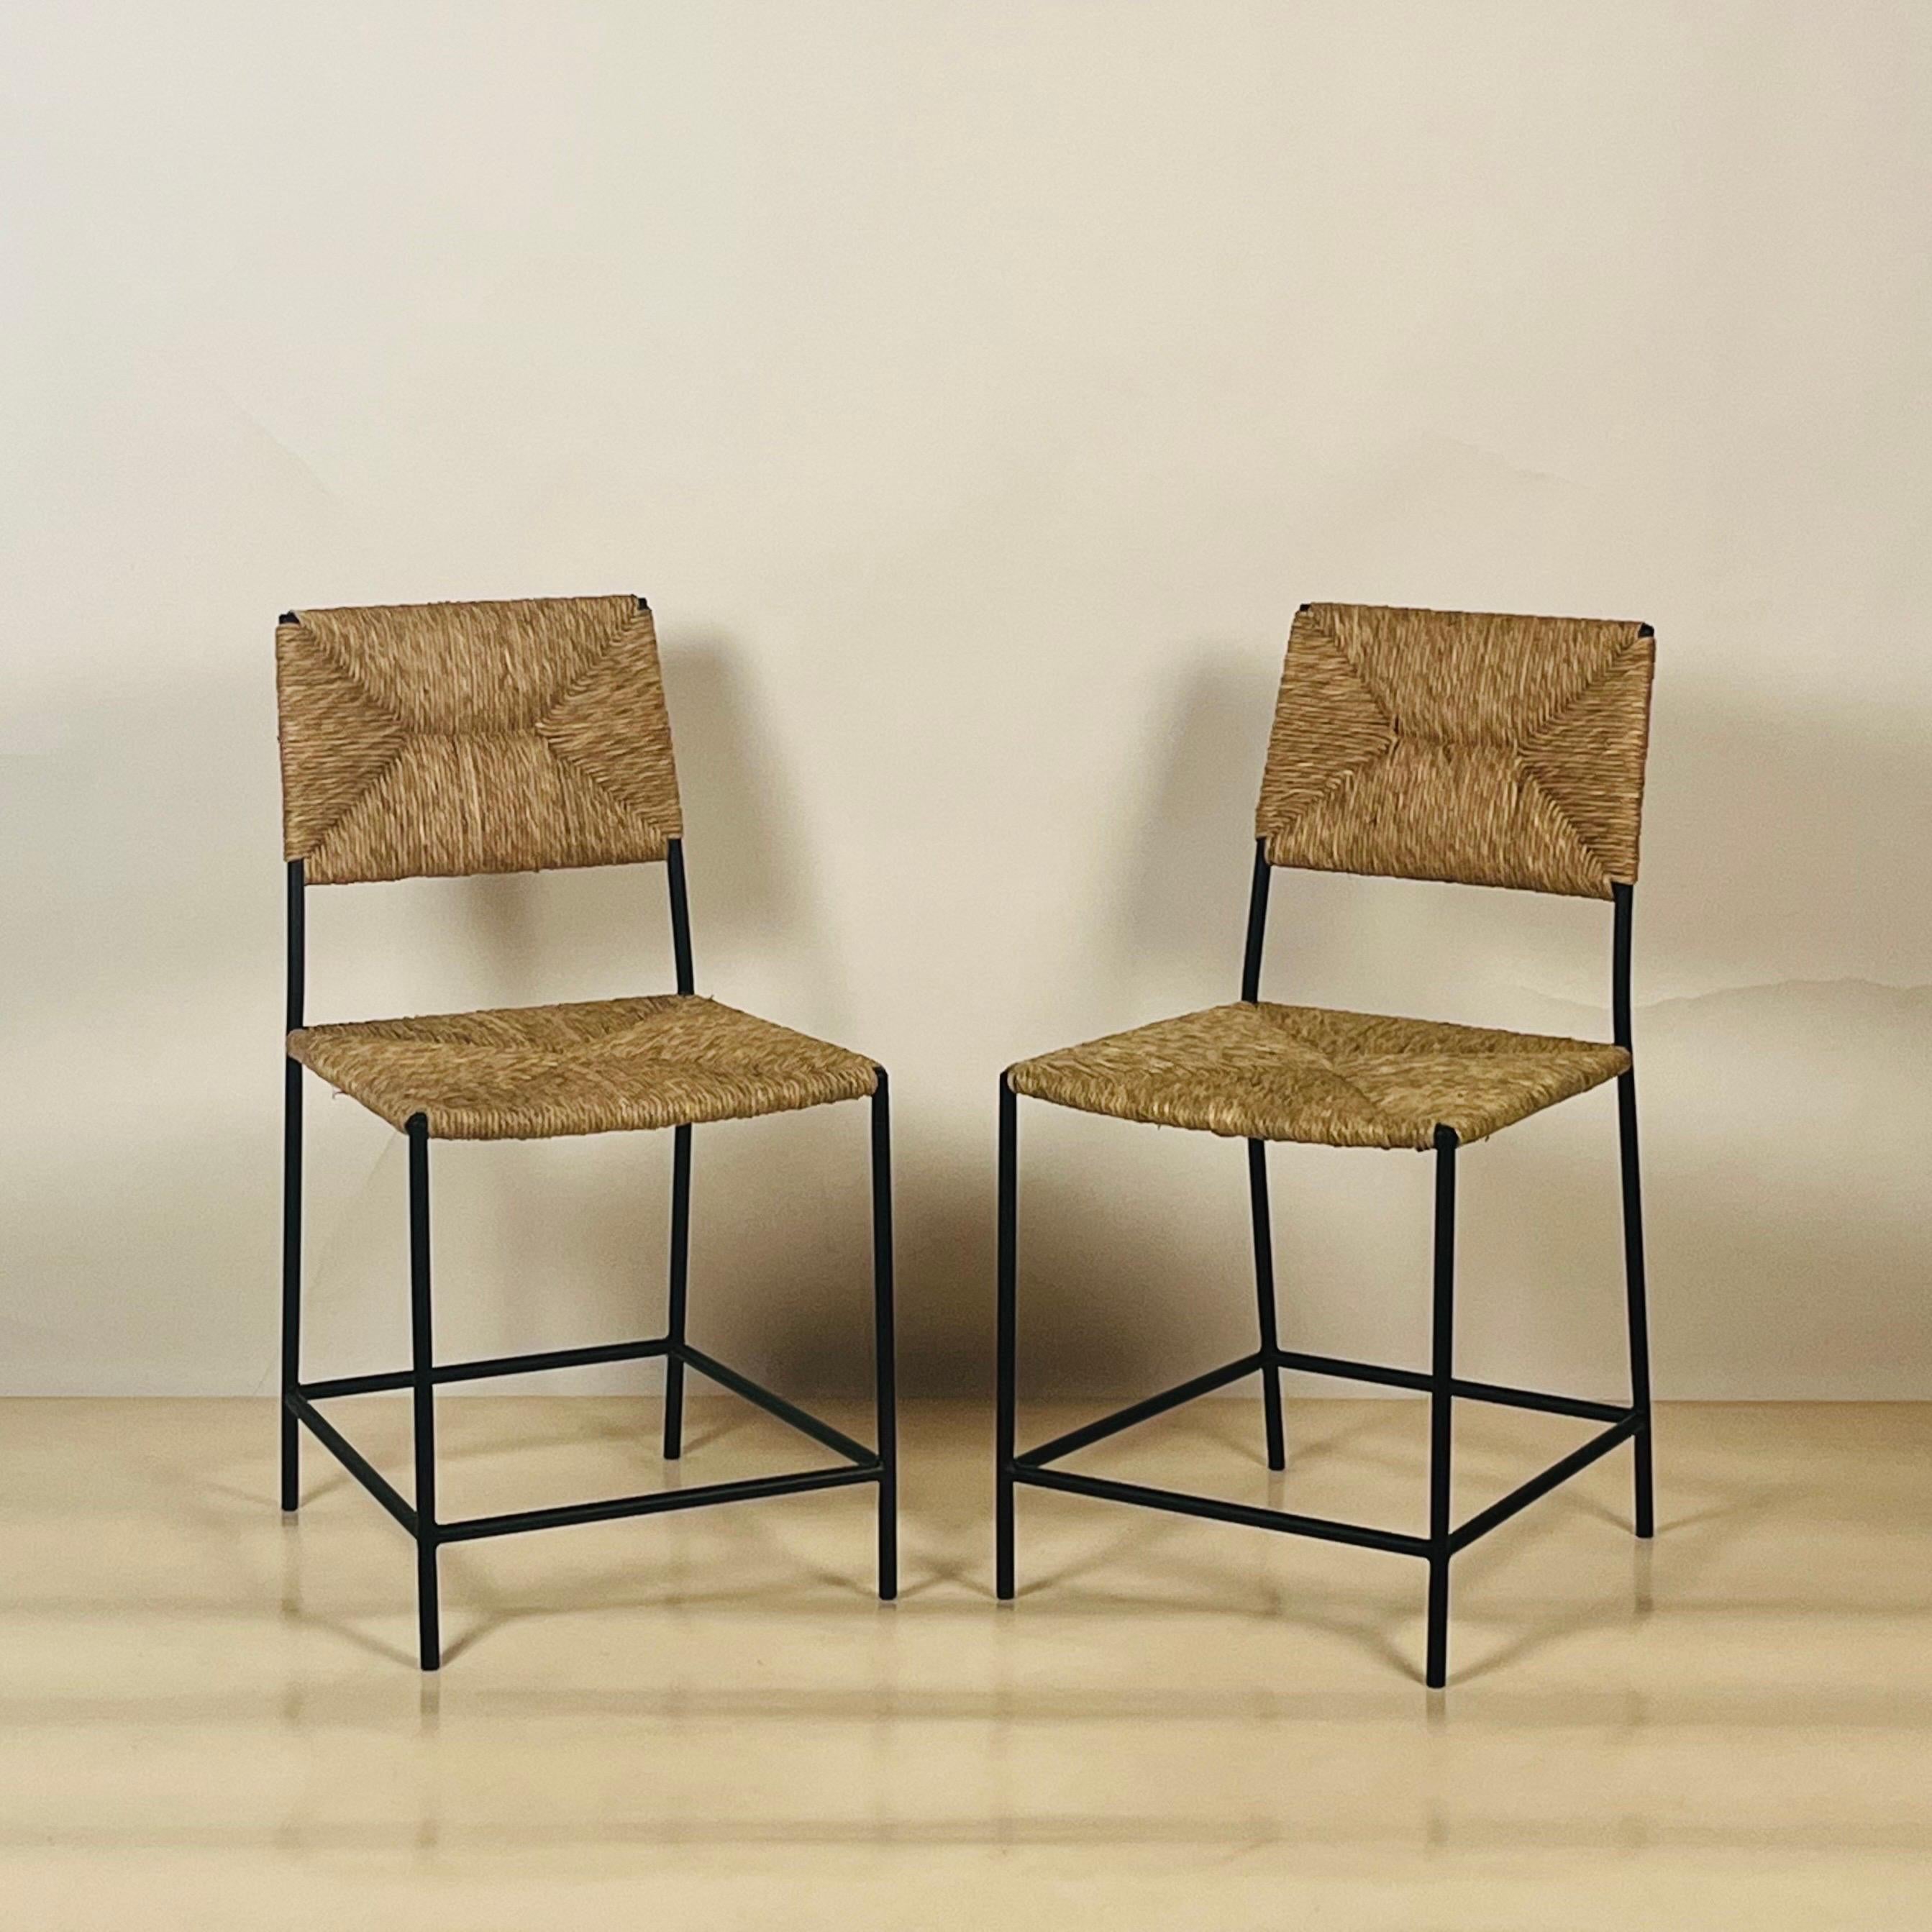 Pair of 'Campagne' chairs by Design Frères.

18 1/2 seat height. Discrete non-scratch gliders on the tips of the legs (picture before last).

Sturdy and comfortable. Chic and understated.